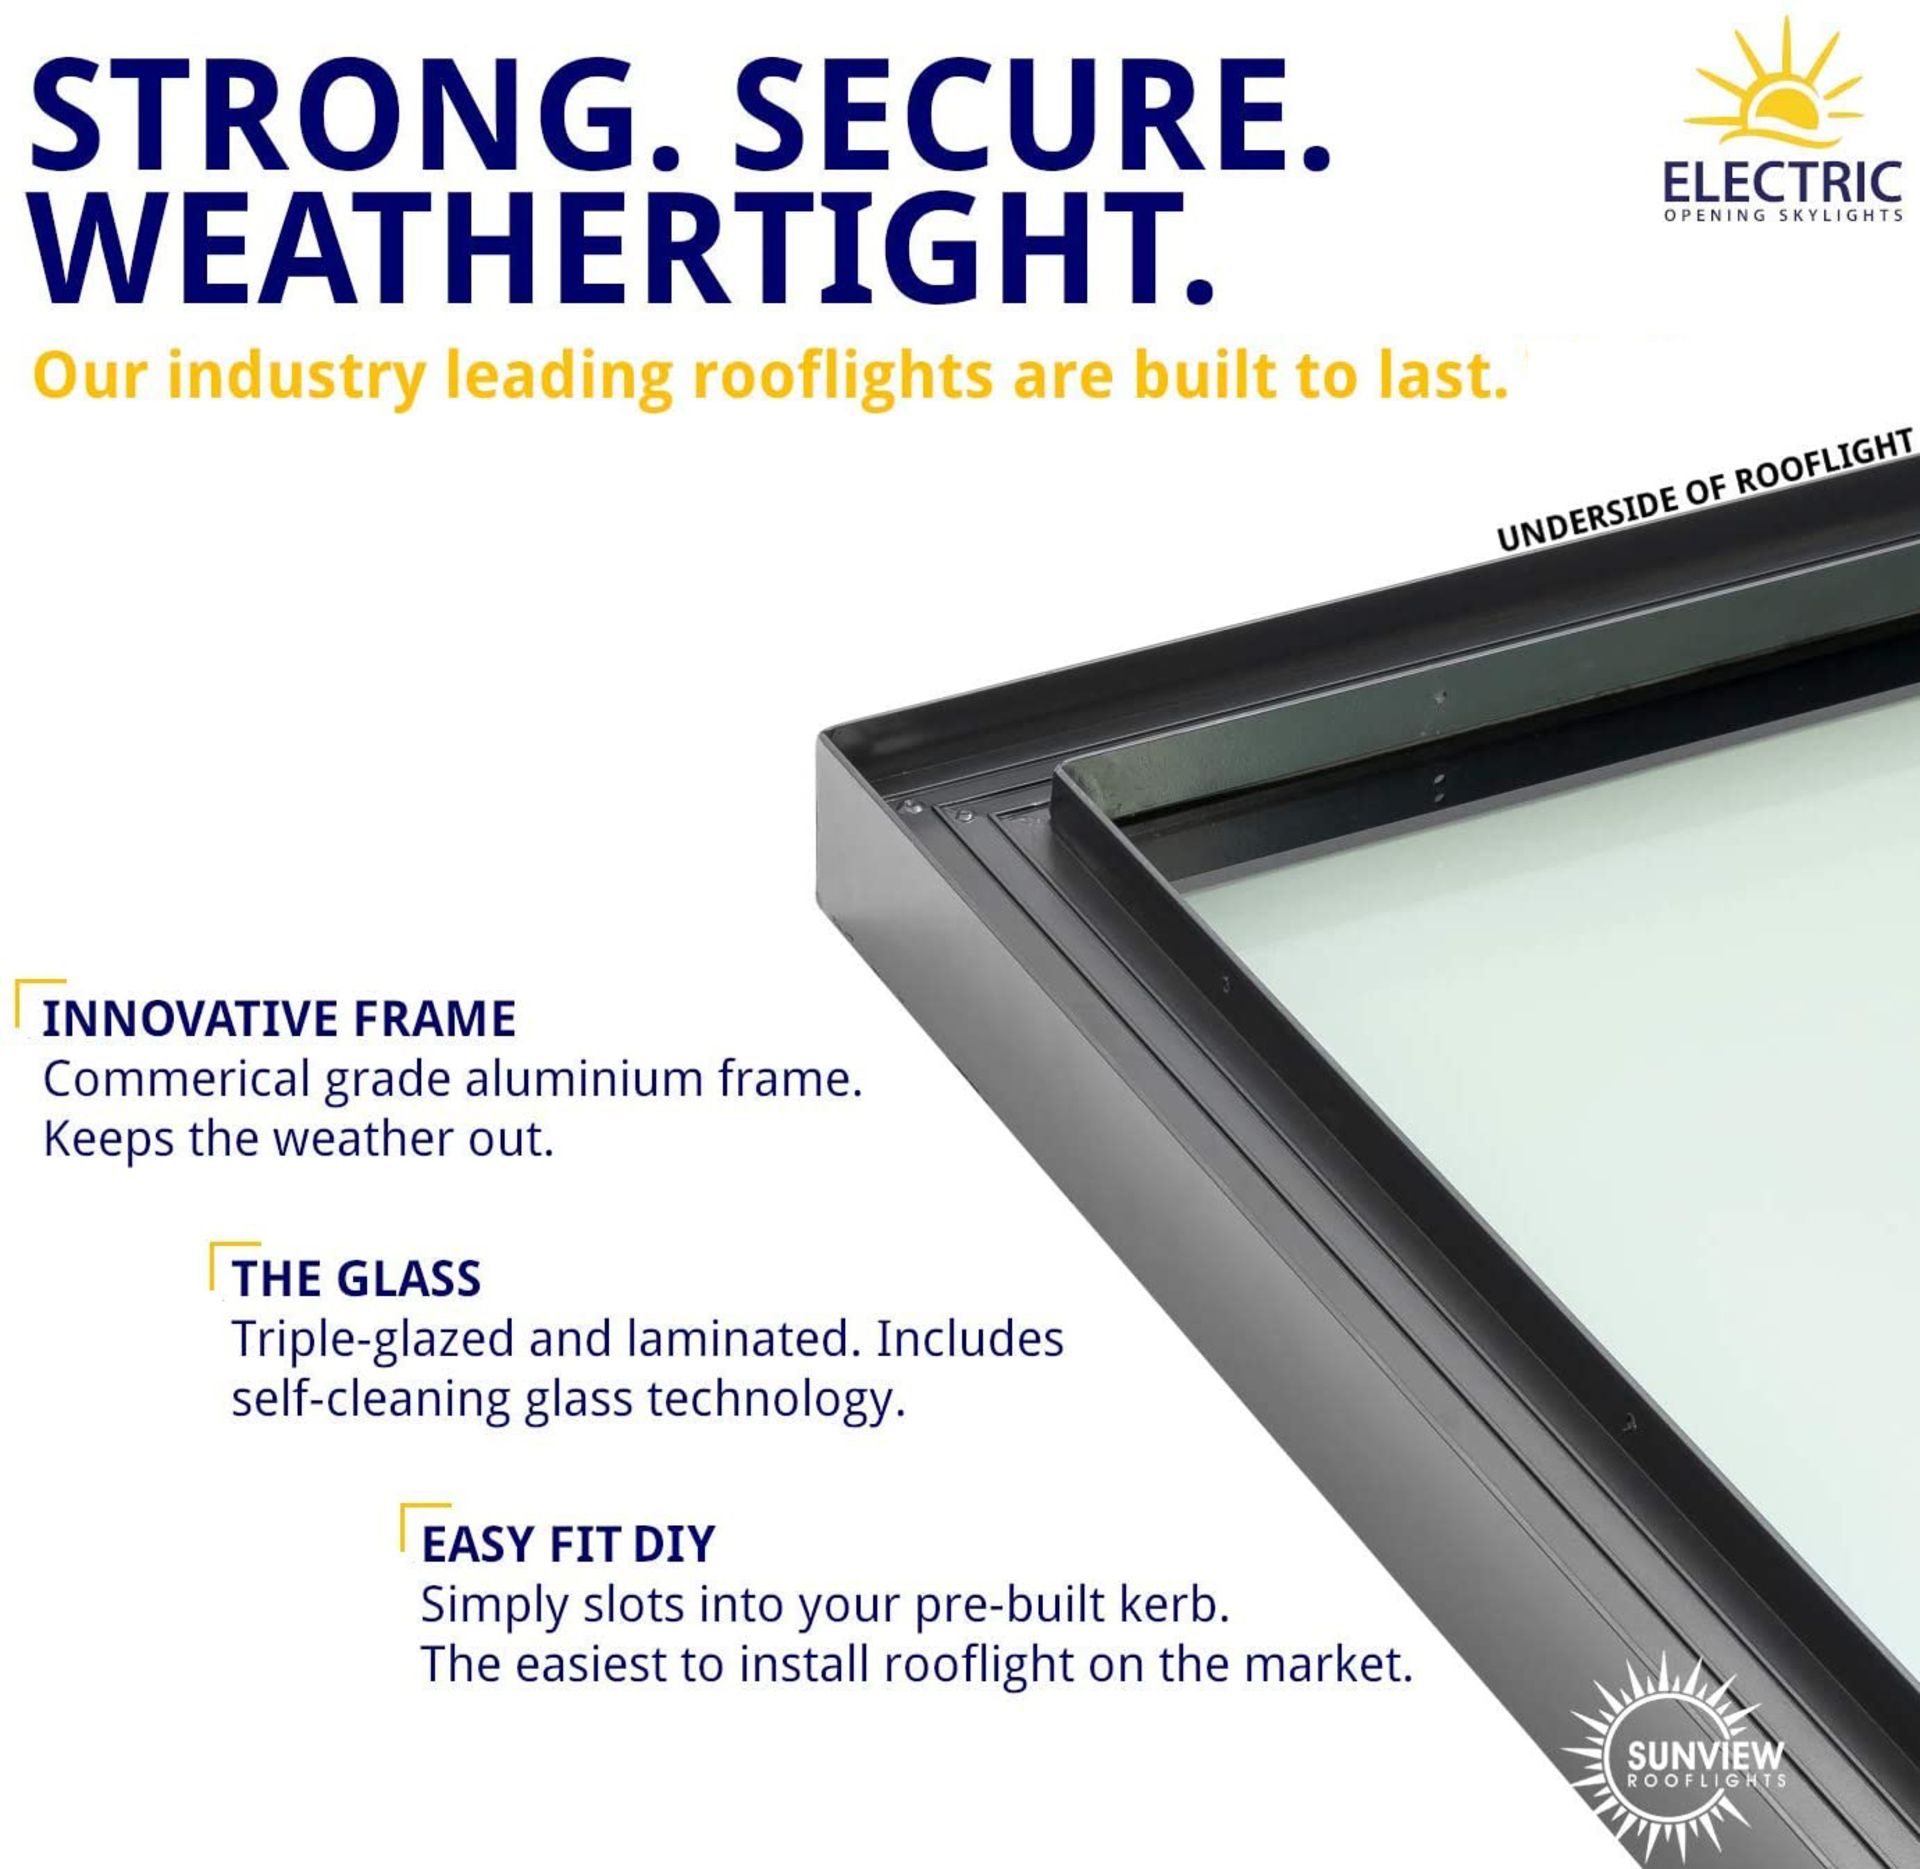 Panoroof (EOS) Fixed Aluminium Triple-Glazed Laminated Skylight with Self-Cleaning Glass - 1000x1000 - Image 2 of 6